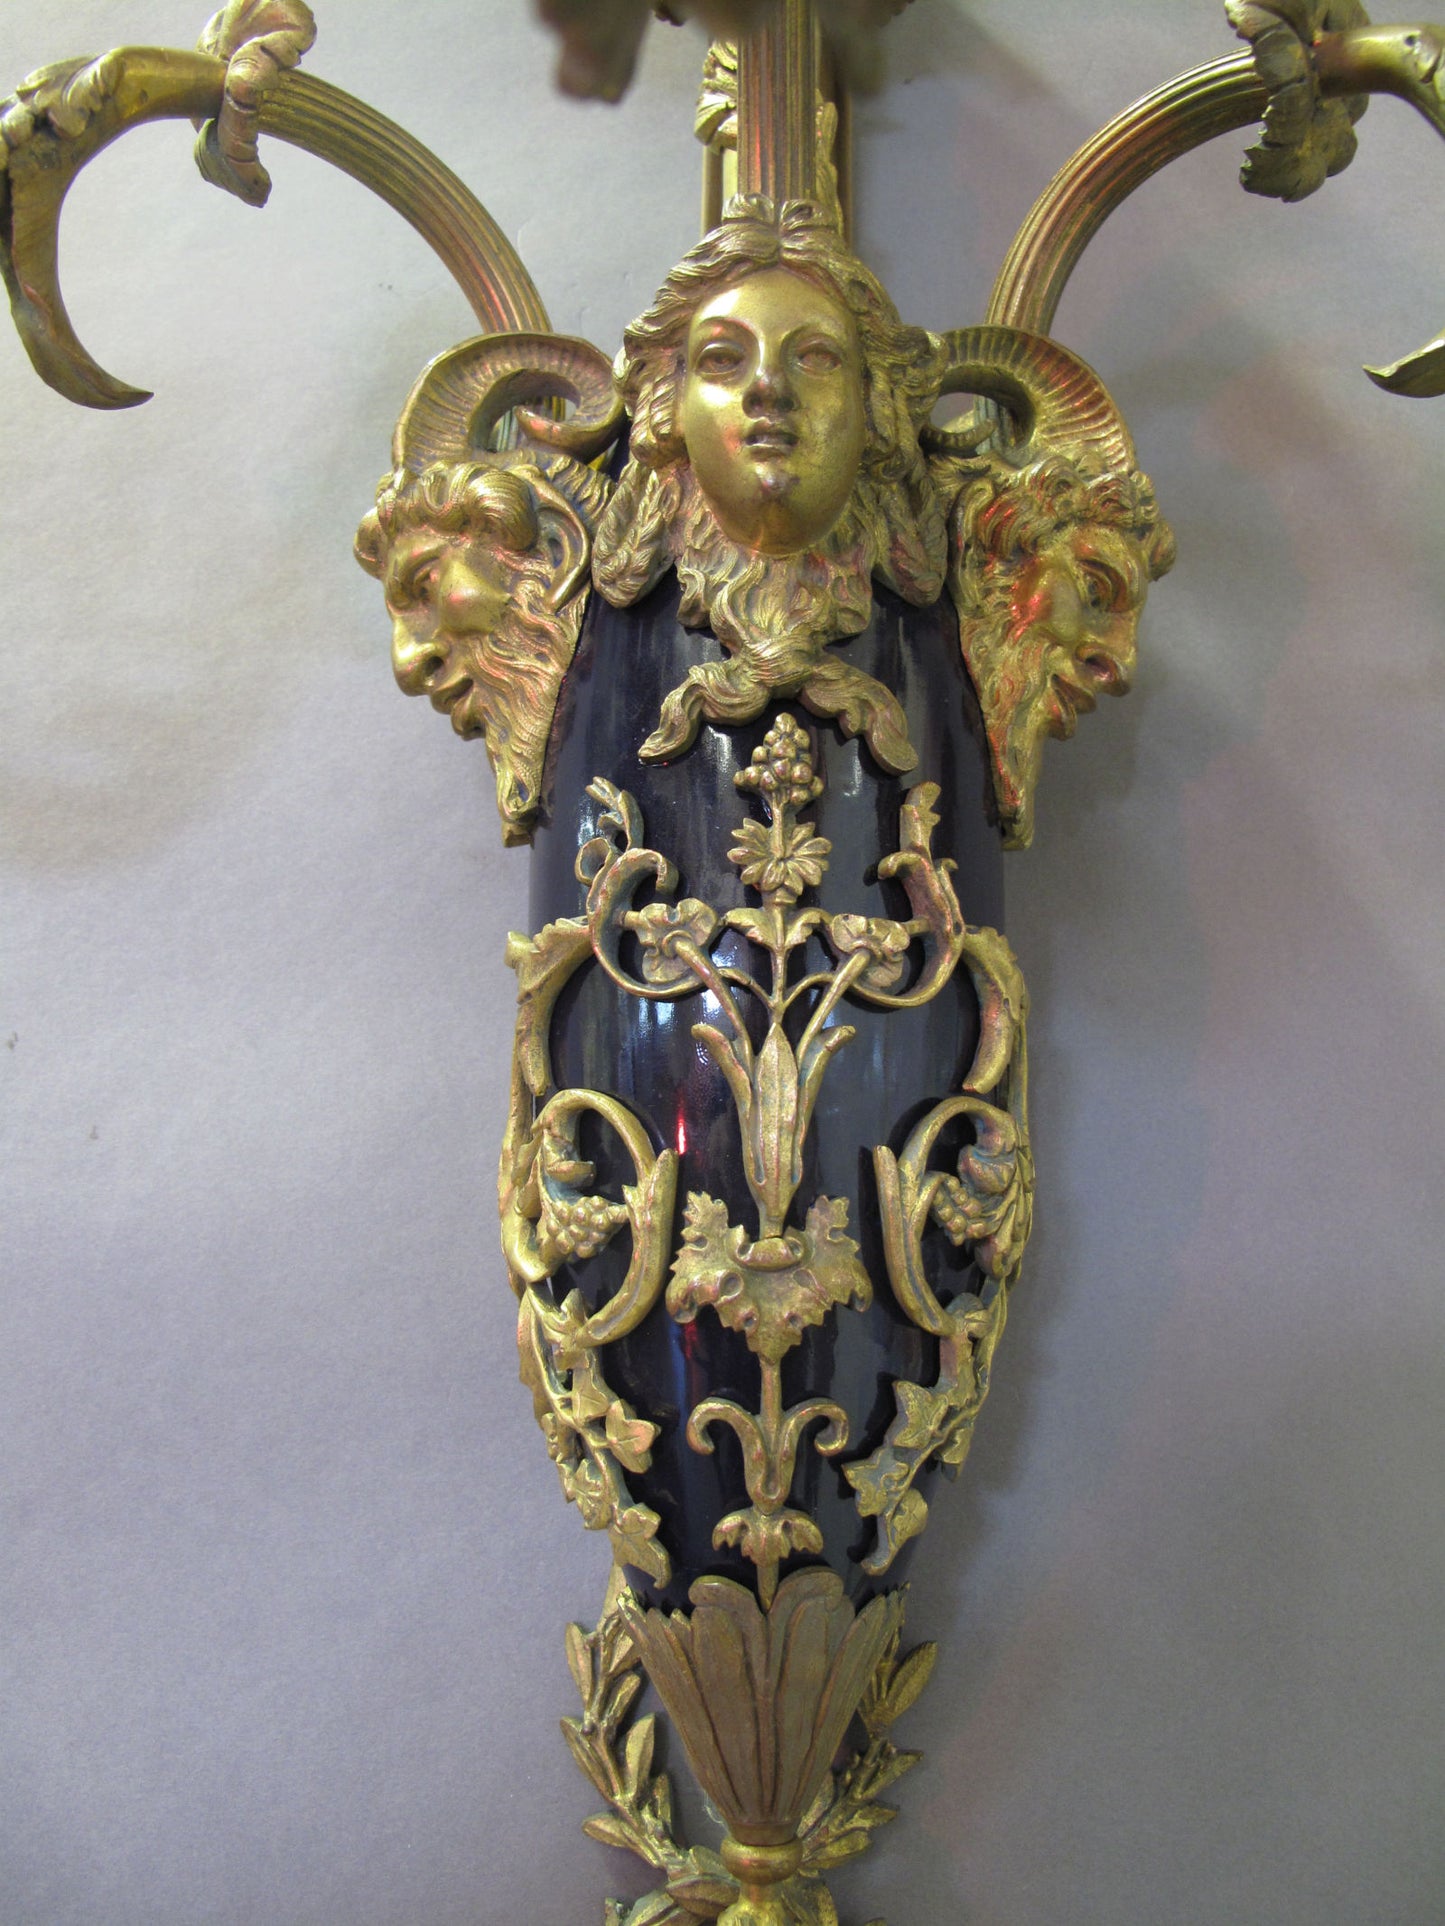 view of 3 heads and floral drapes on centre of wall light